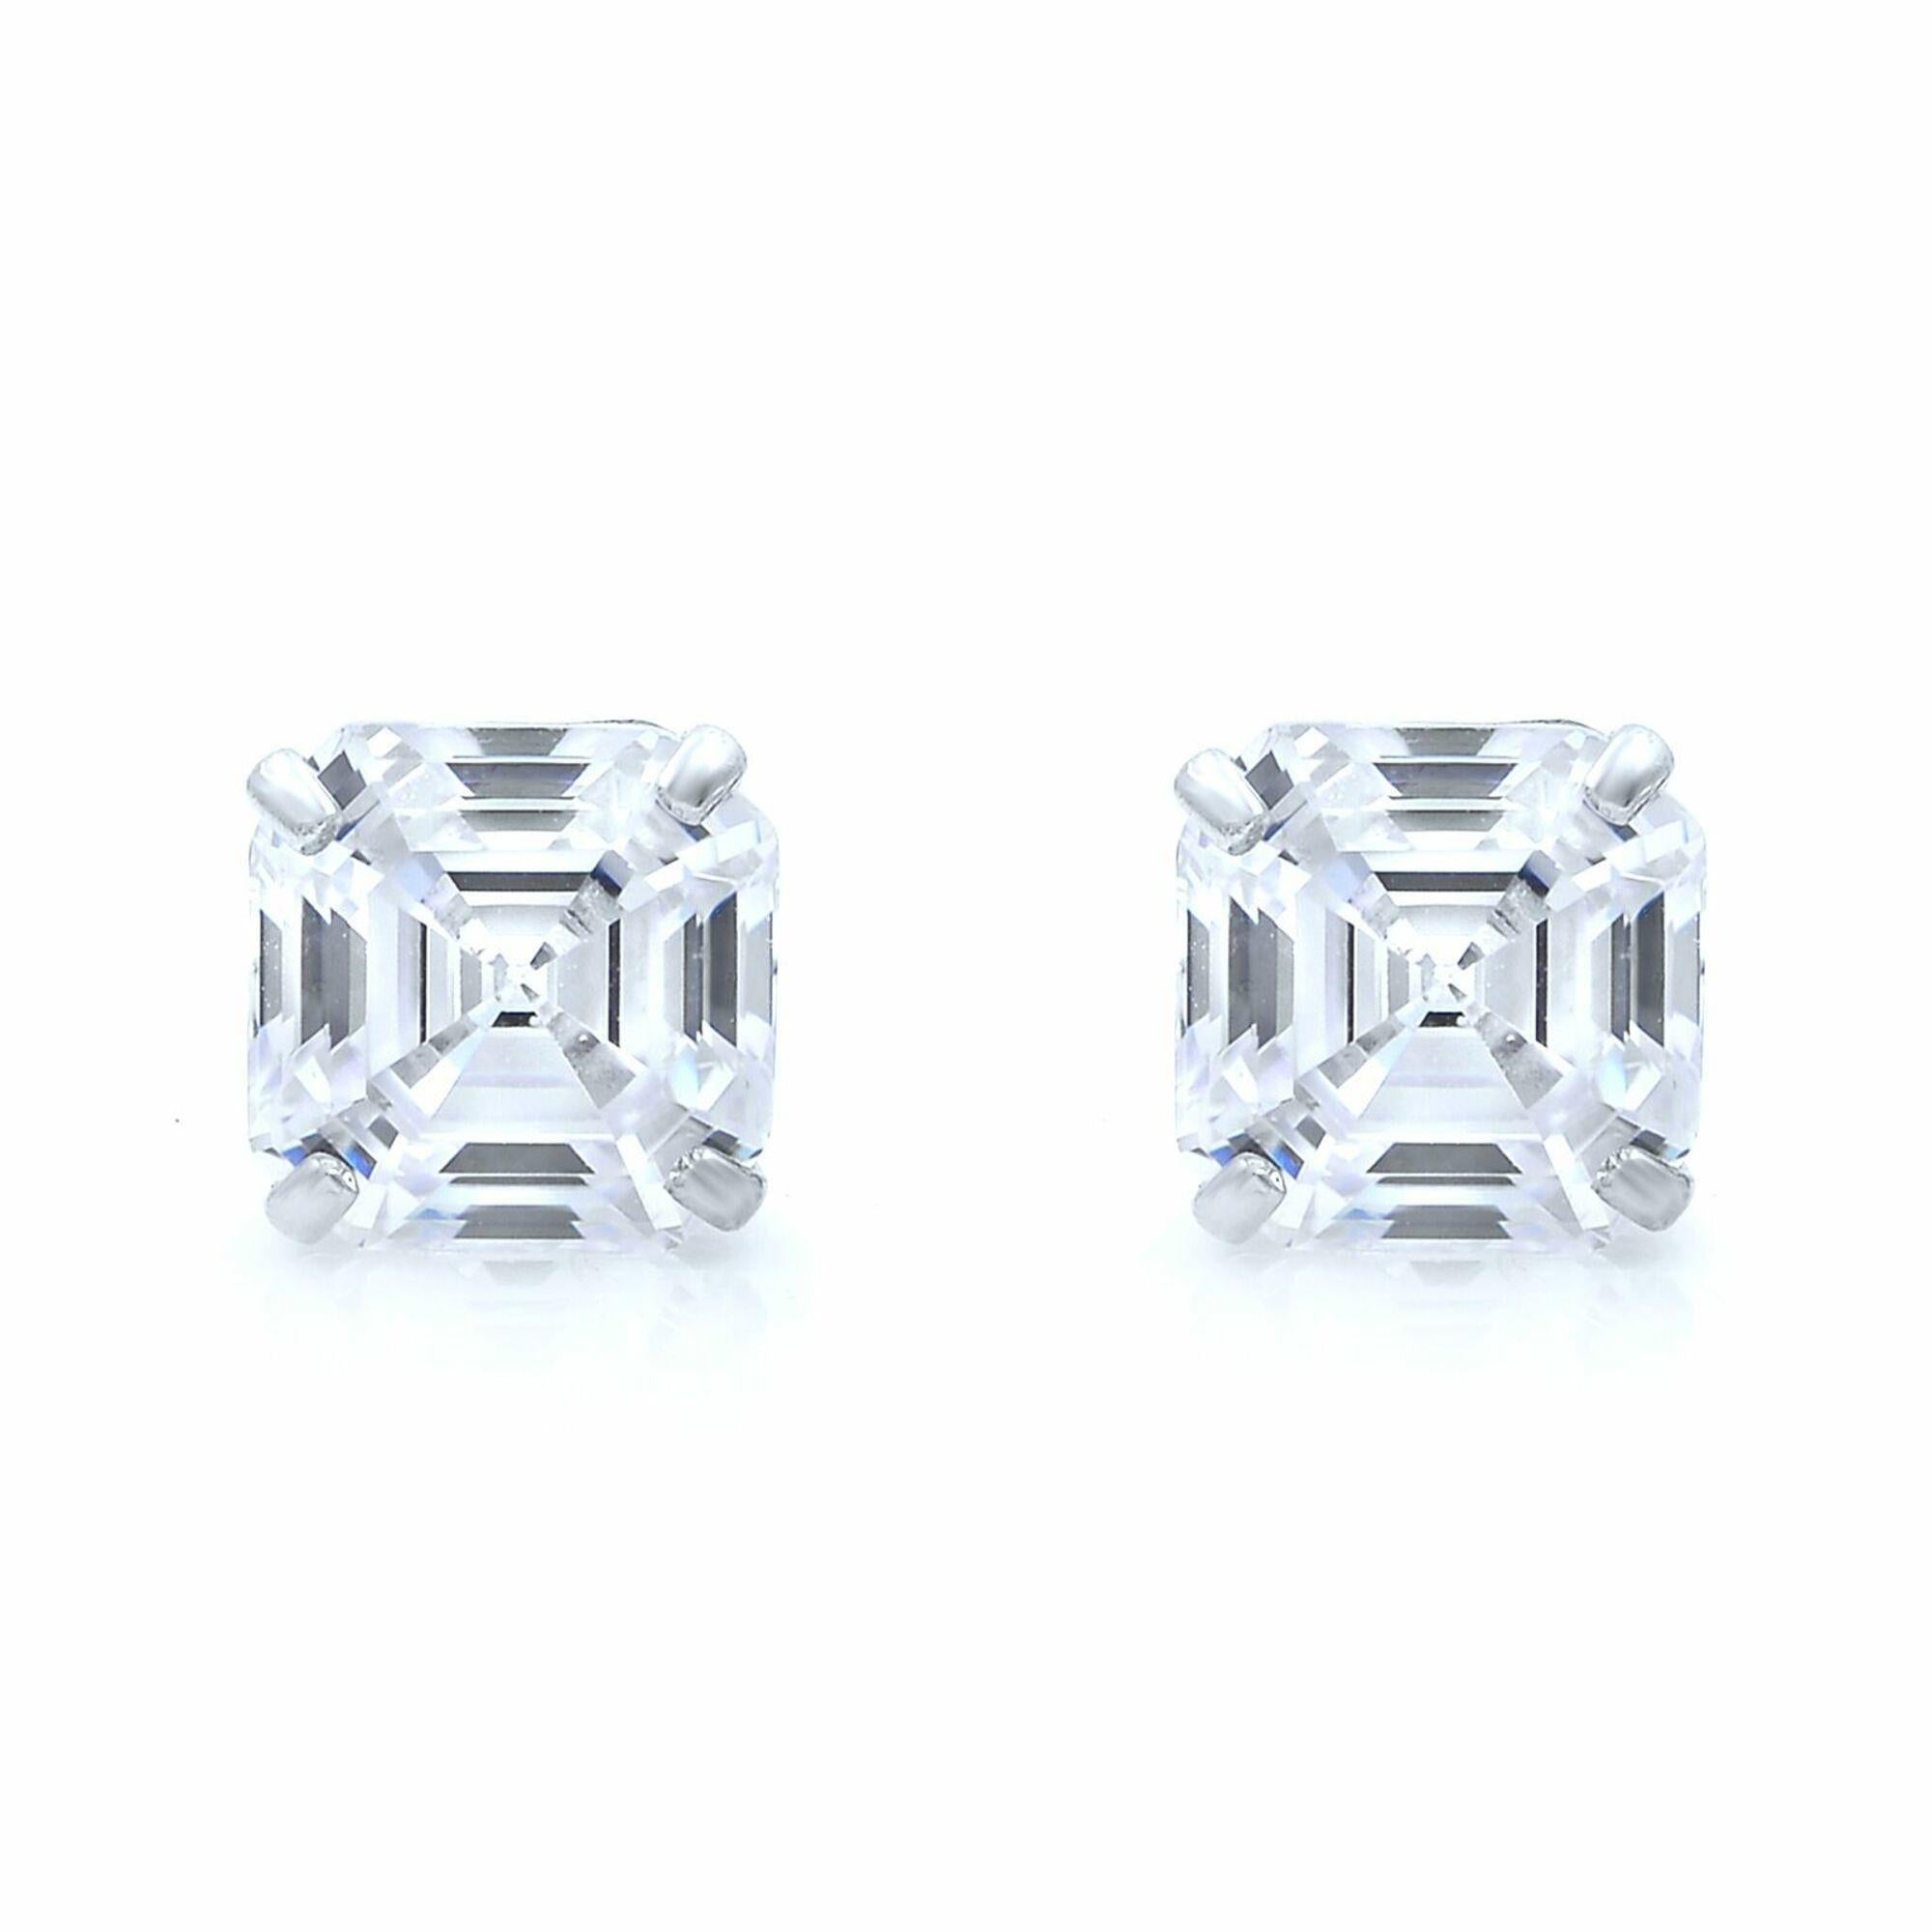 These classic stud earrings are featuring gorgeous Asscher Cut cubic zirconia stones set in our four-prong basket setting. Each stone is 7mm set in 14K white gold. Push back closure. Comes with a presentable gift box.